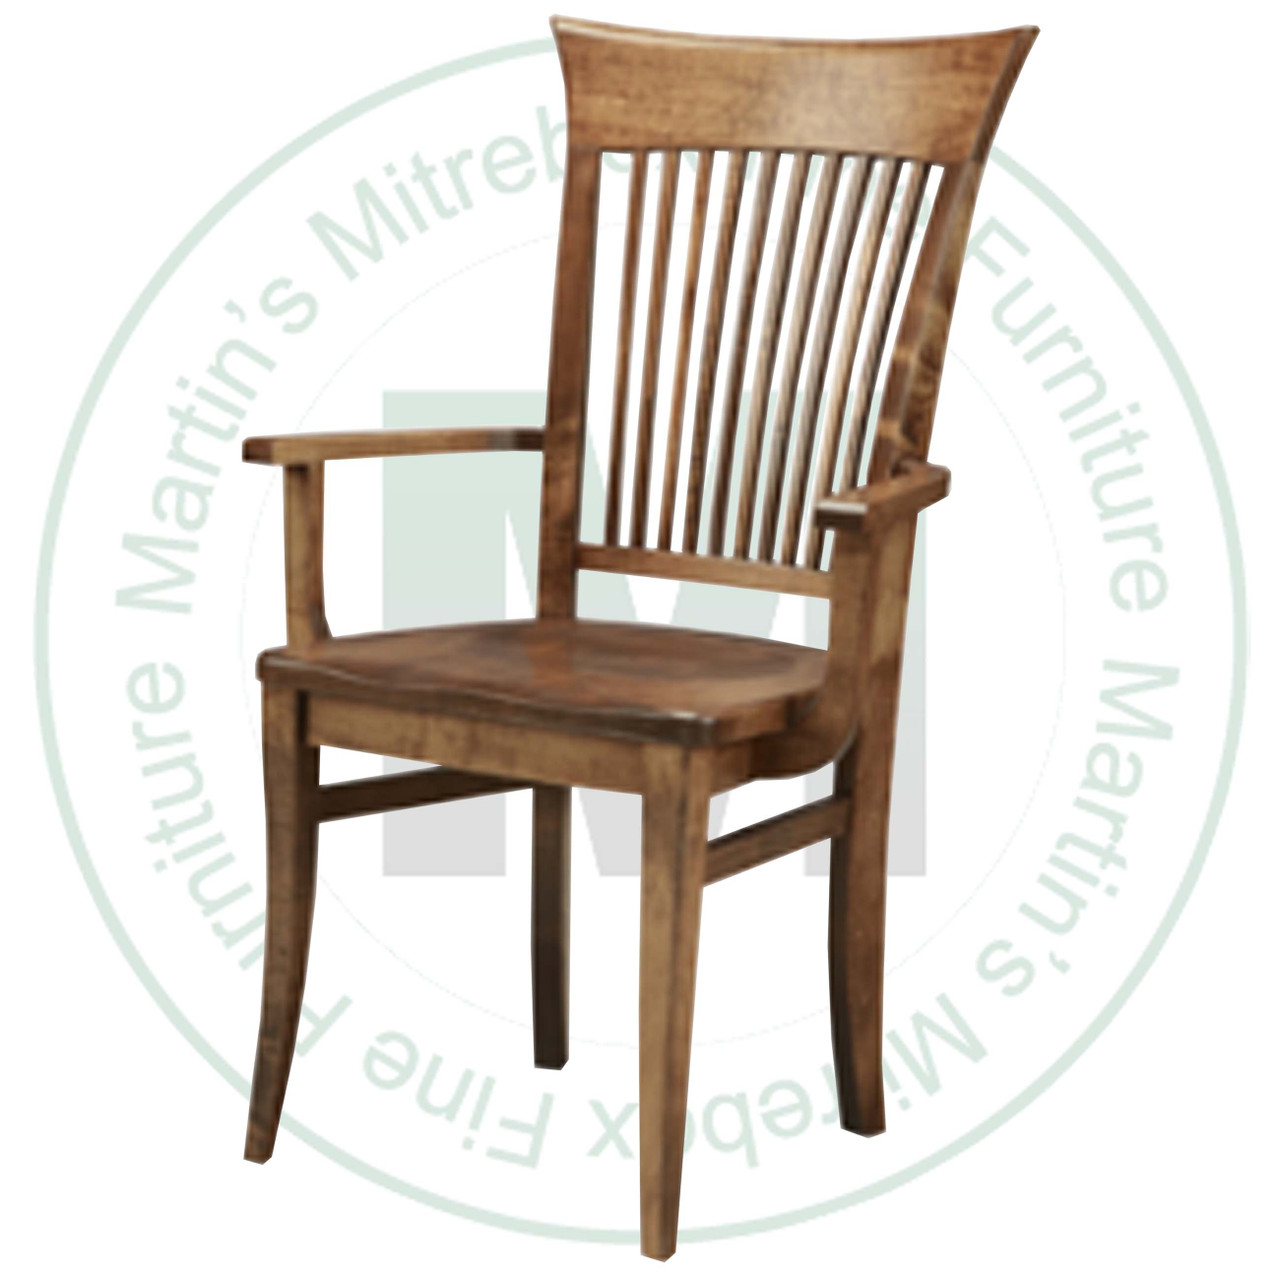 Oak Essex Arm Chair With Wood Seat